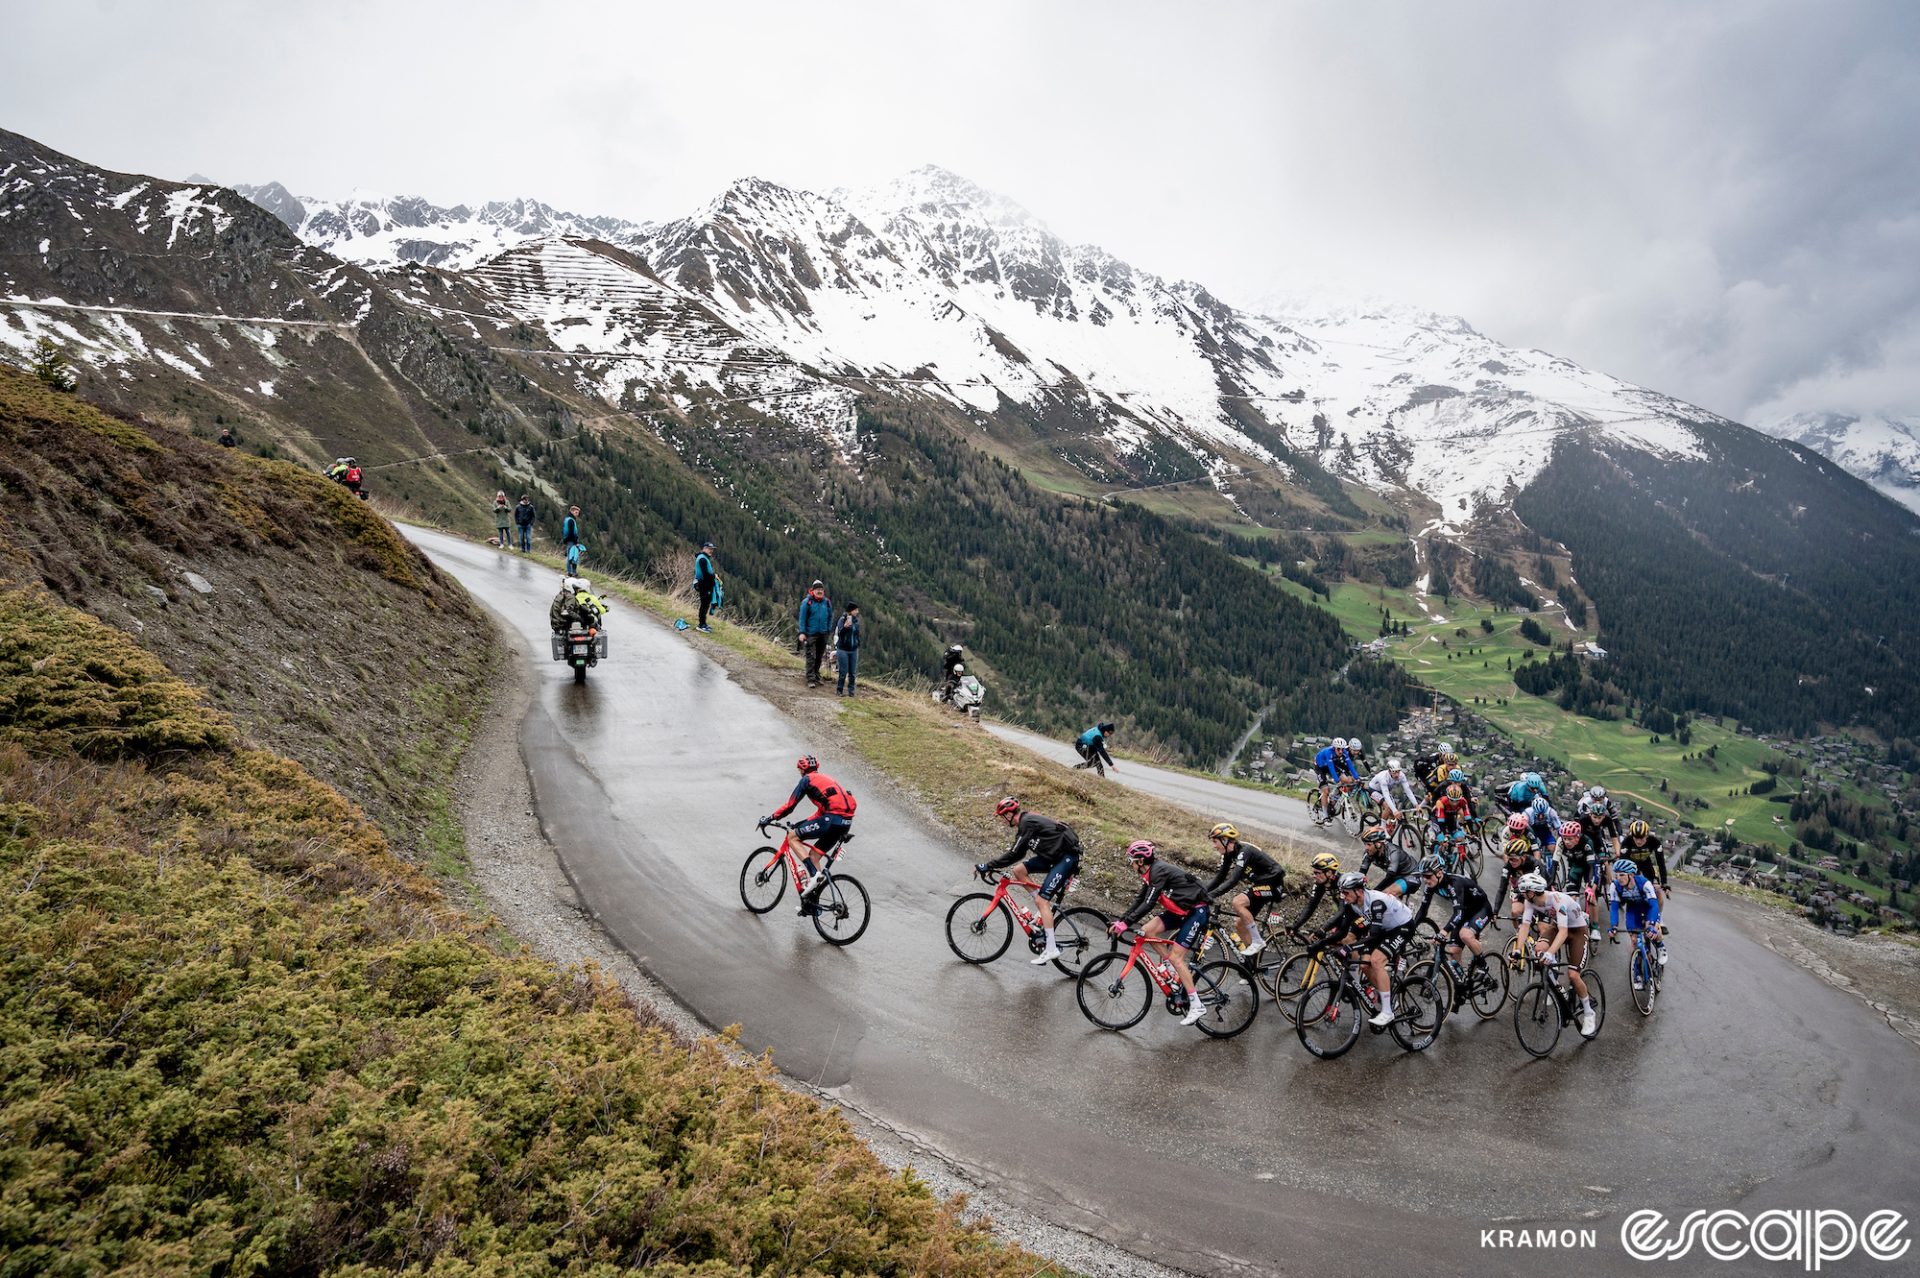 Riders climb the Croix de Couer in the 2023 Giro d'Italia. It's clearly cold: riders are wearing jackets and climbing a wet road under grey skies as they ride up into mountains covered with a fresh snowfall.